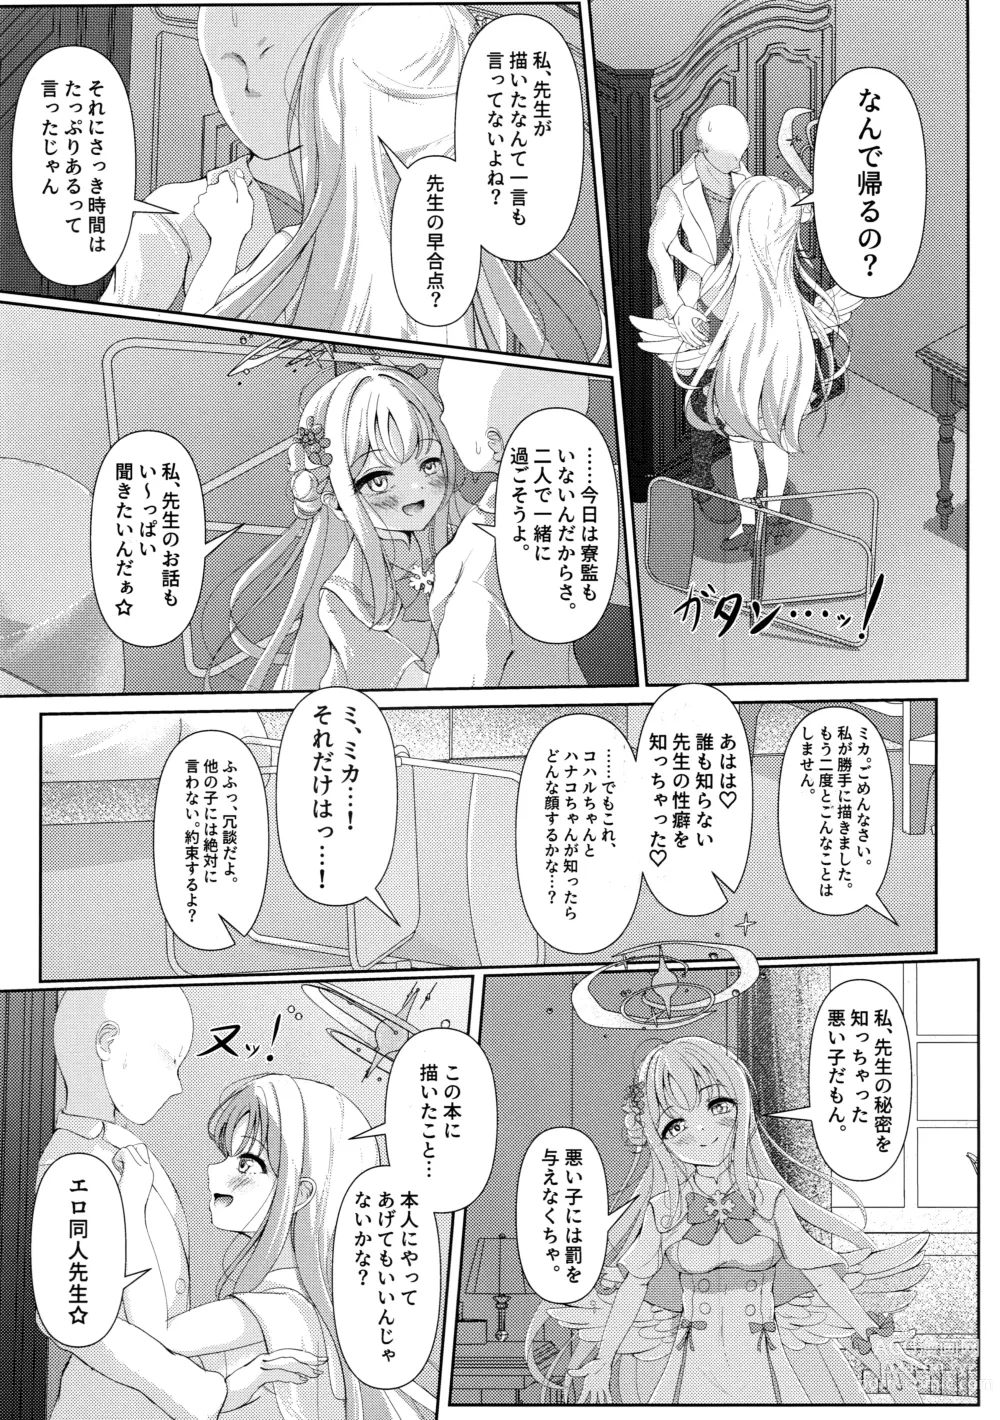 Page 6 of doujinshi Sleeping with the Dear Constellation.